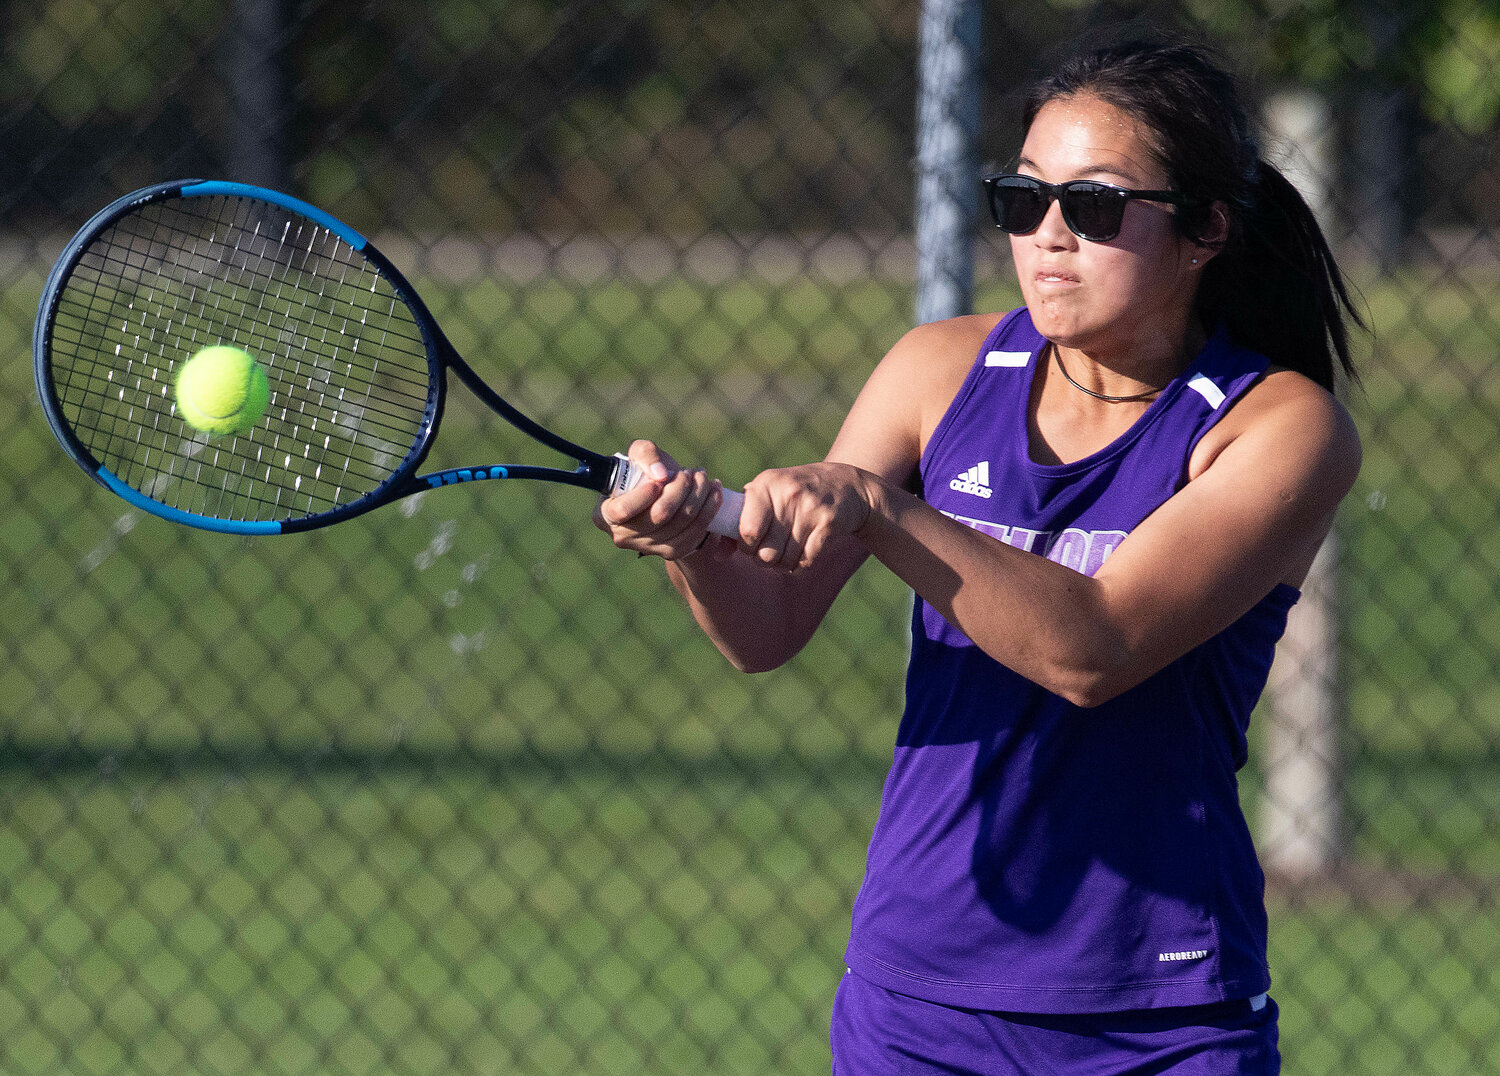 Huskies first singles player Elsa White hits a backhand during her 6-3, 6-4, win over Mia Renzulli of Prout. White has been dominant at times in her 4-1 start to the season.